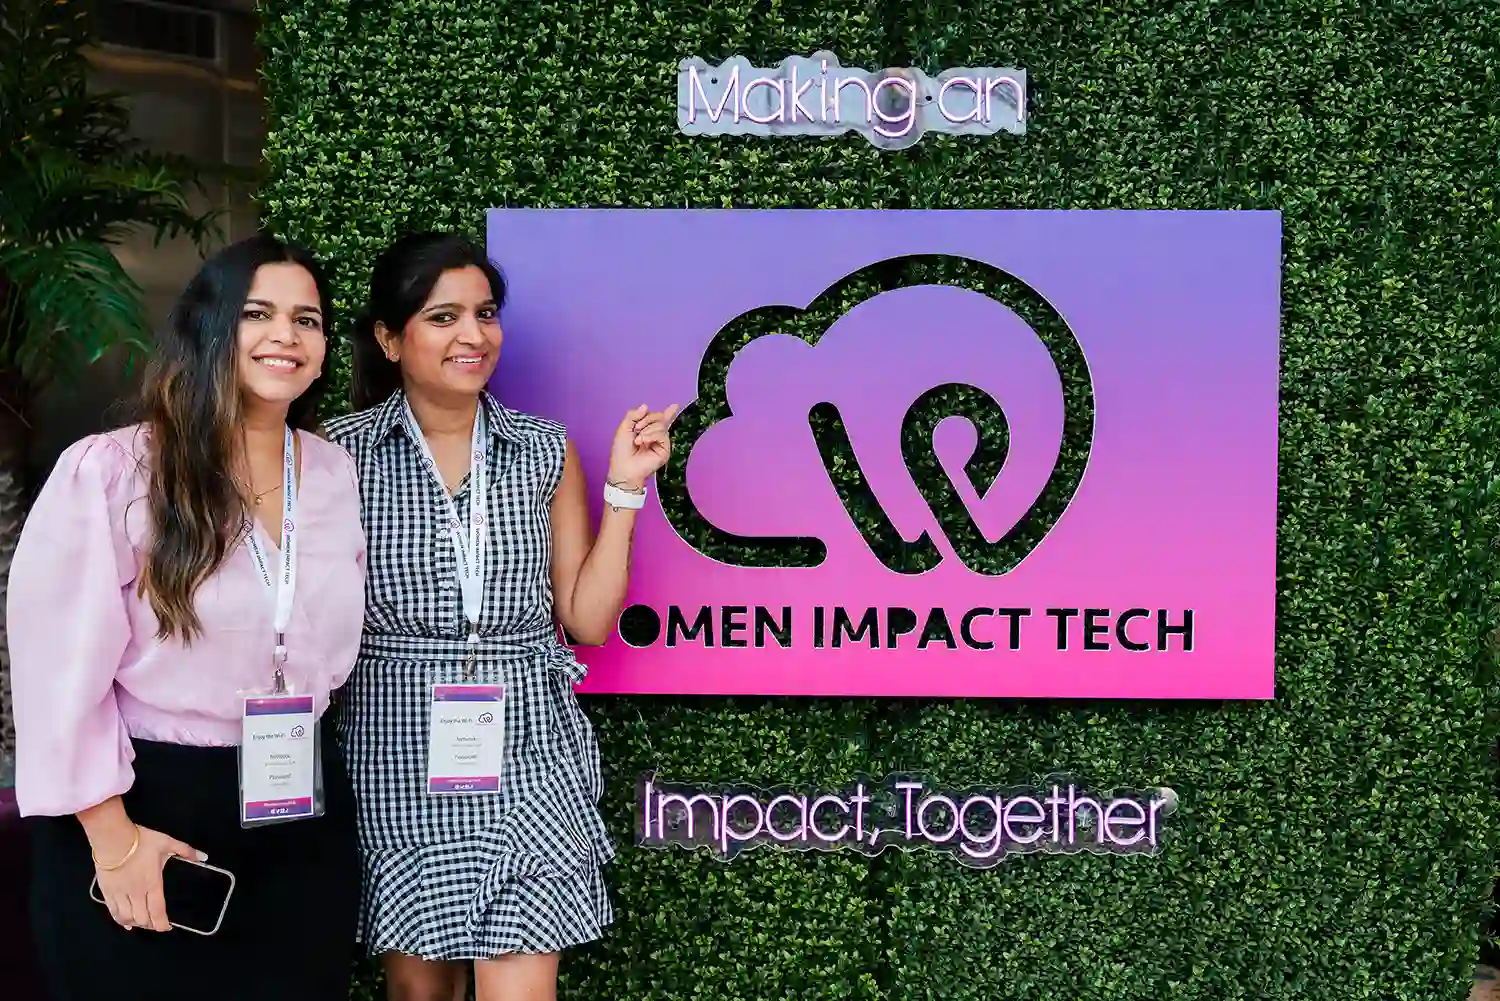 Women Impact Tech Get comfortable with Accelerate Conference details and layout